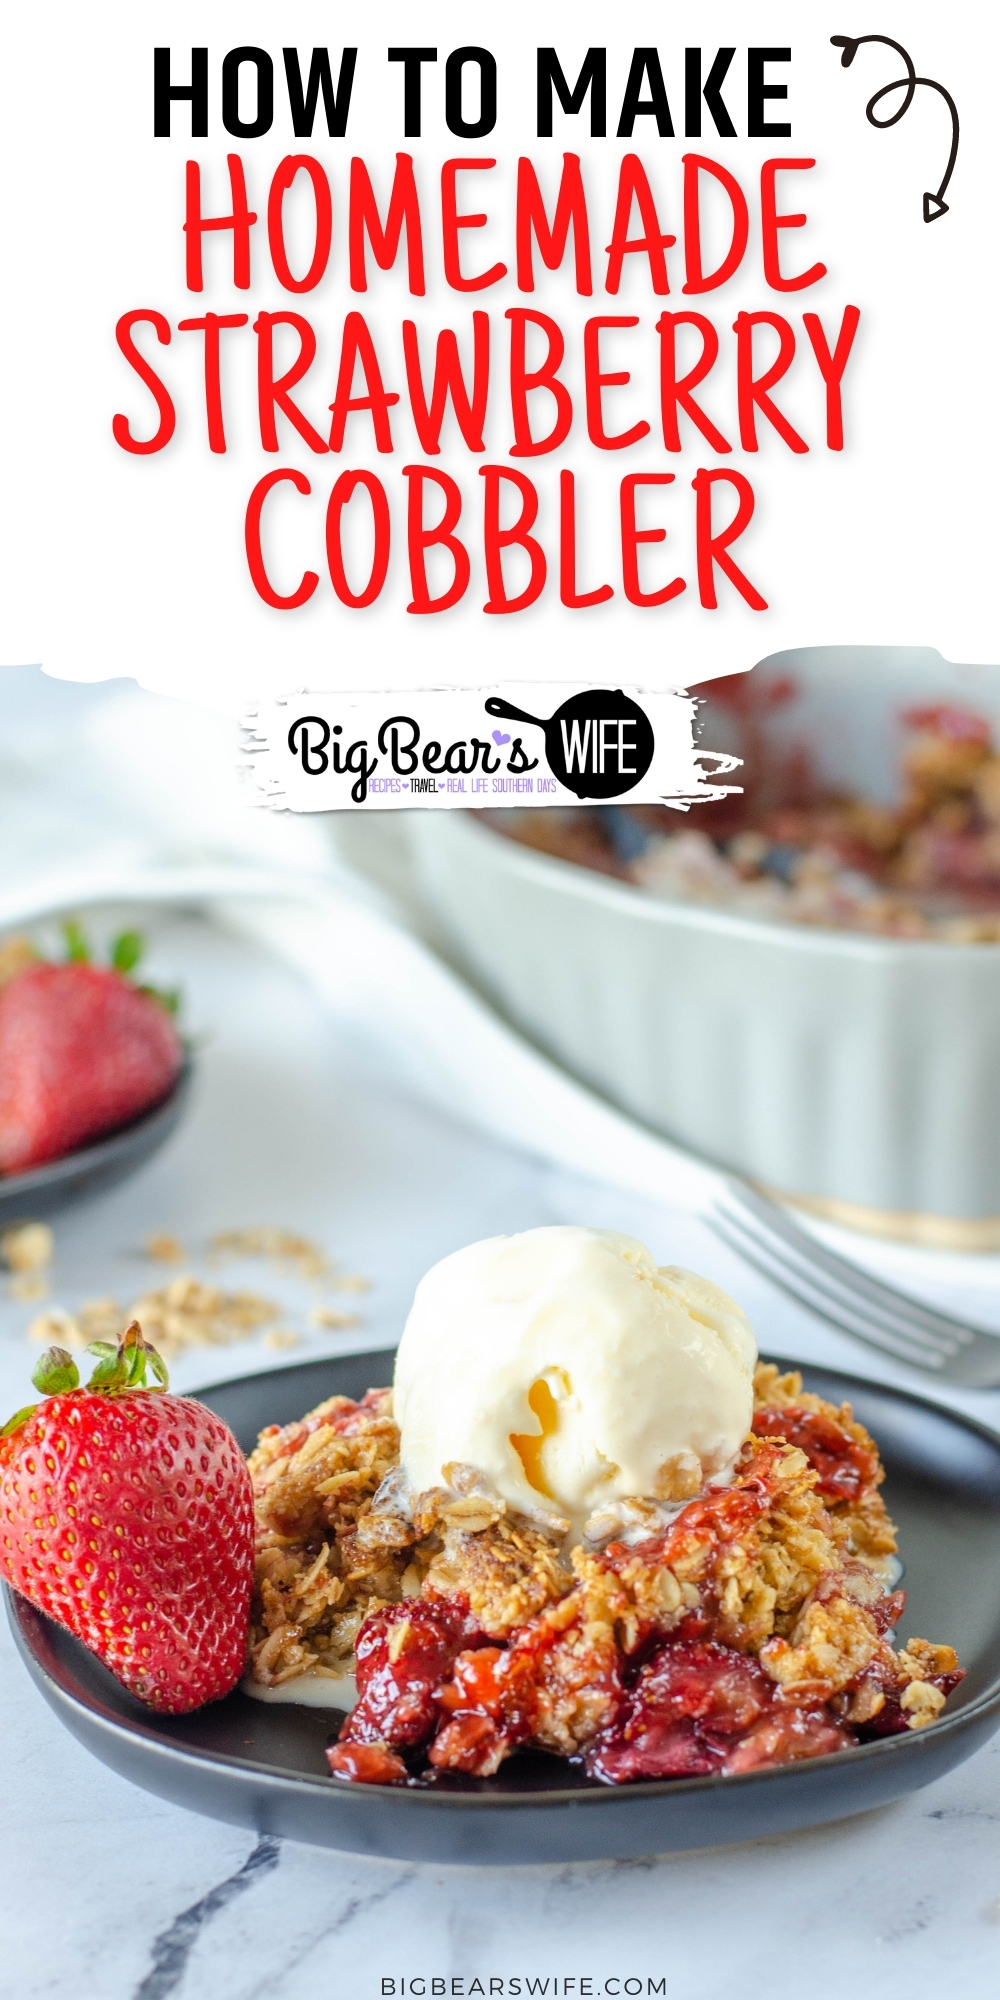 Call this Homemade Strawberry Cobbler, Strawberry Crumble or a Strawberry crisp but also call it delicious! Sweet Summer Strawberries are baked into a sweet bubbly dessert with a sweet topping. via @bigbearswife